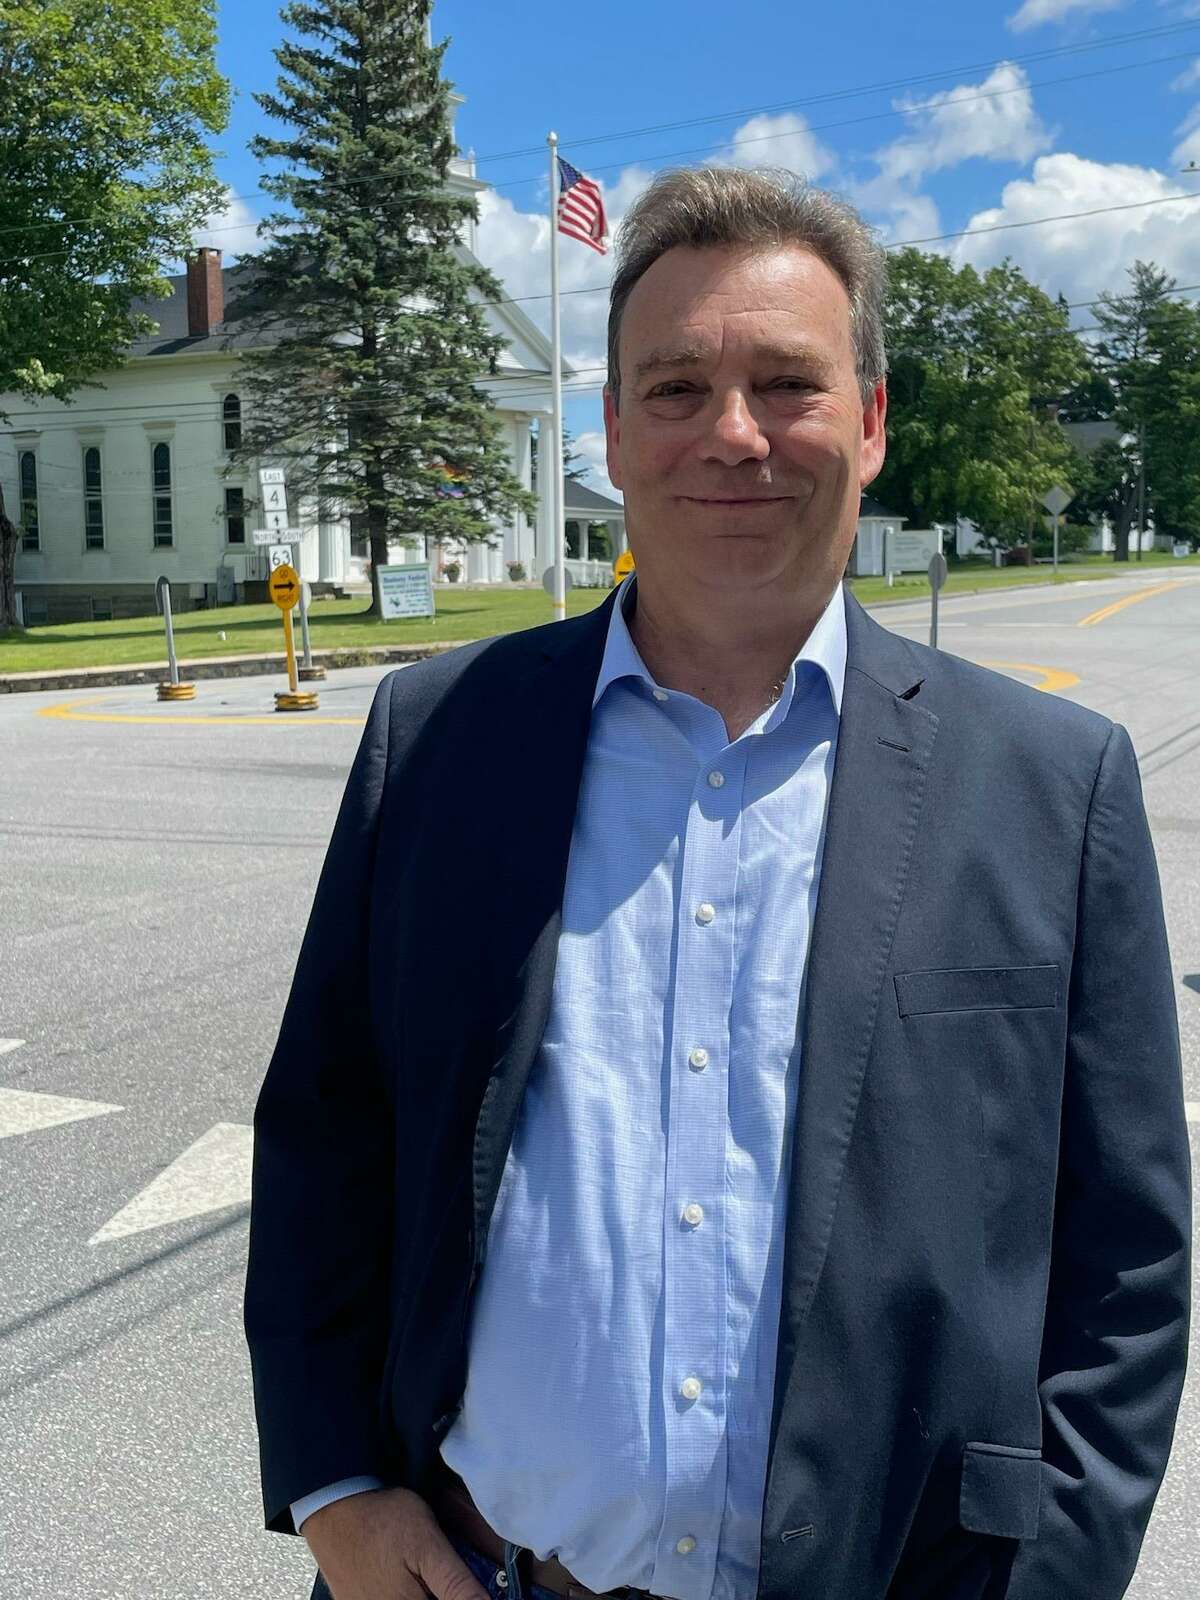 Democrat and First Selectman candidate Peter Kujawski is holding a town hall forum at 7 p.m. 28 at the Goshen Town Hall, moderated by retired appellate Judge Anne Dranginis.